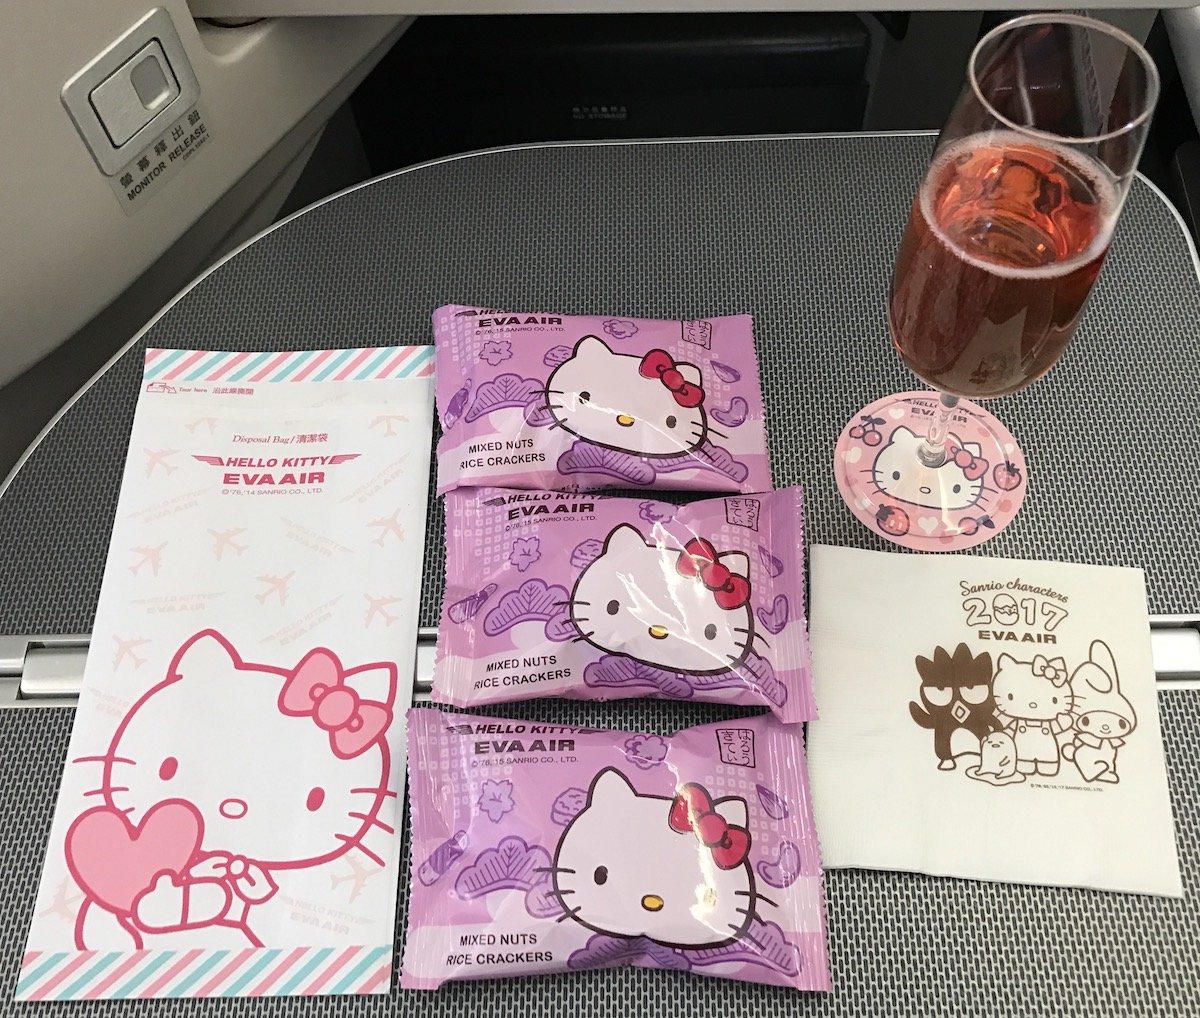 Guide To EVA Air's Outrageous Hello Kitty Flights One Mile at a Time